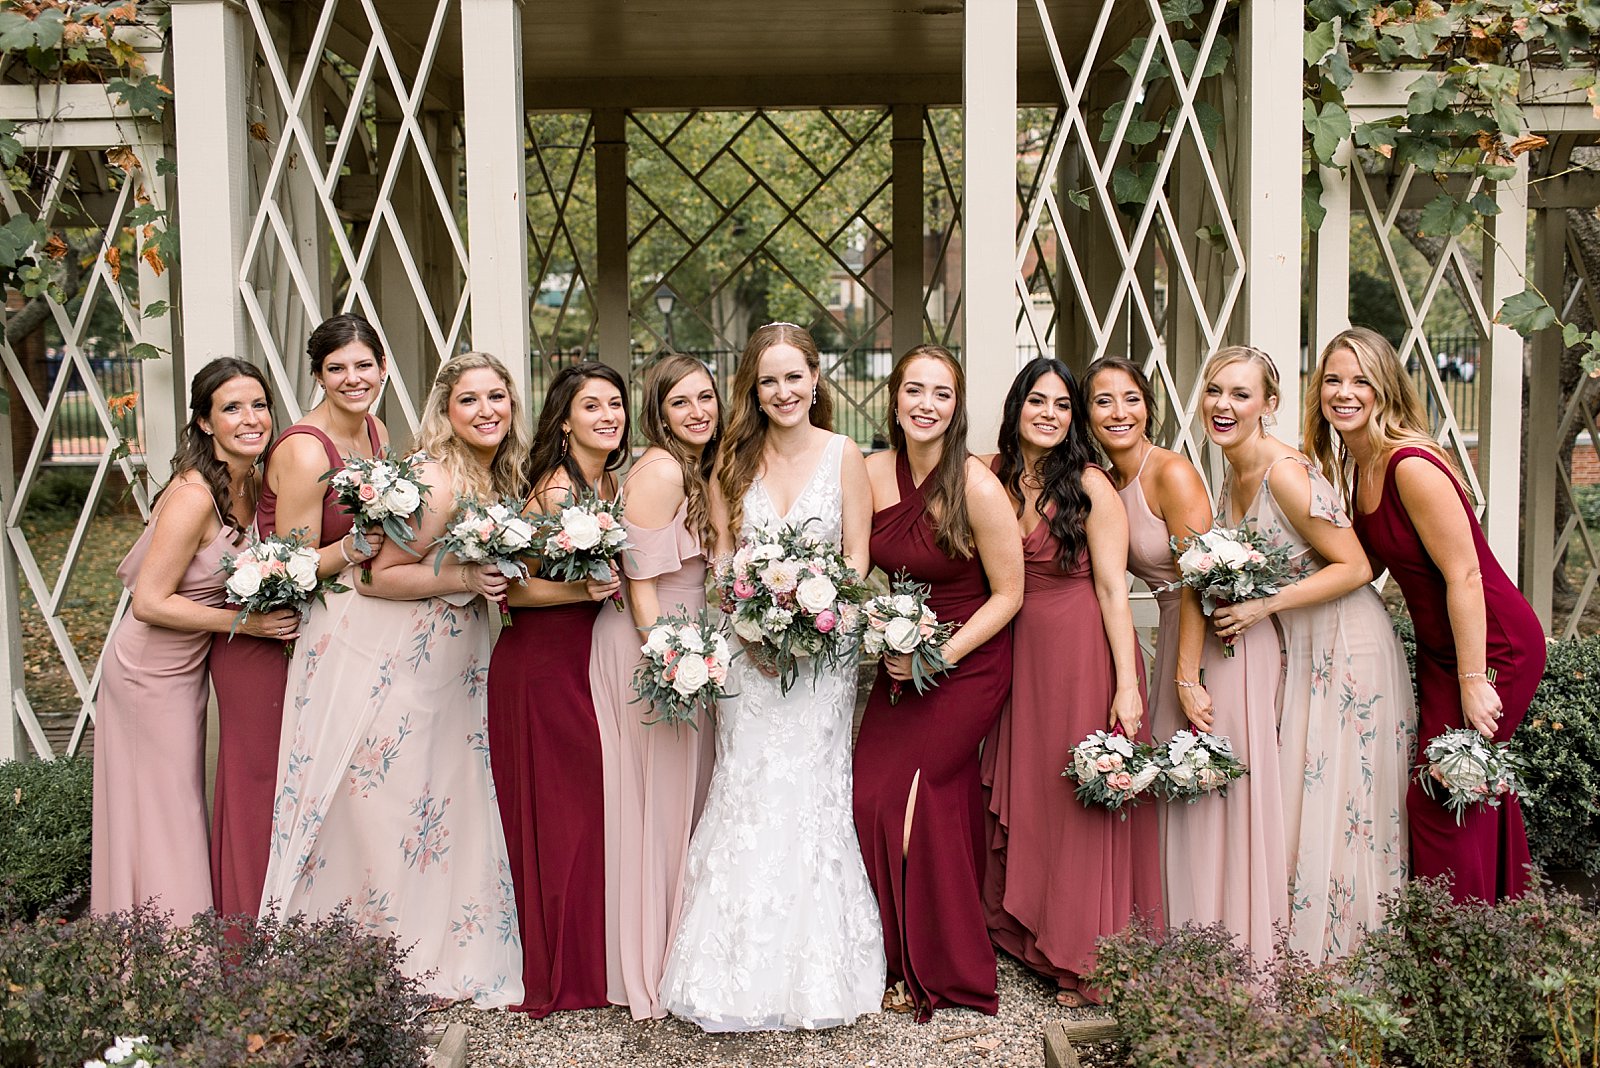 bride poses with bridesmaids in mismatched burgundy and pink gowns by gazebo